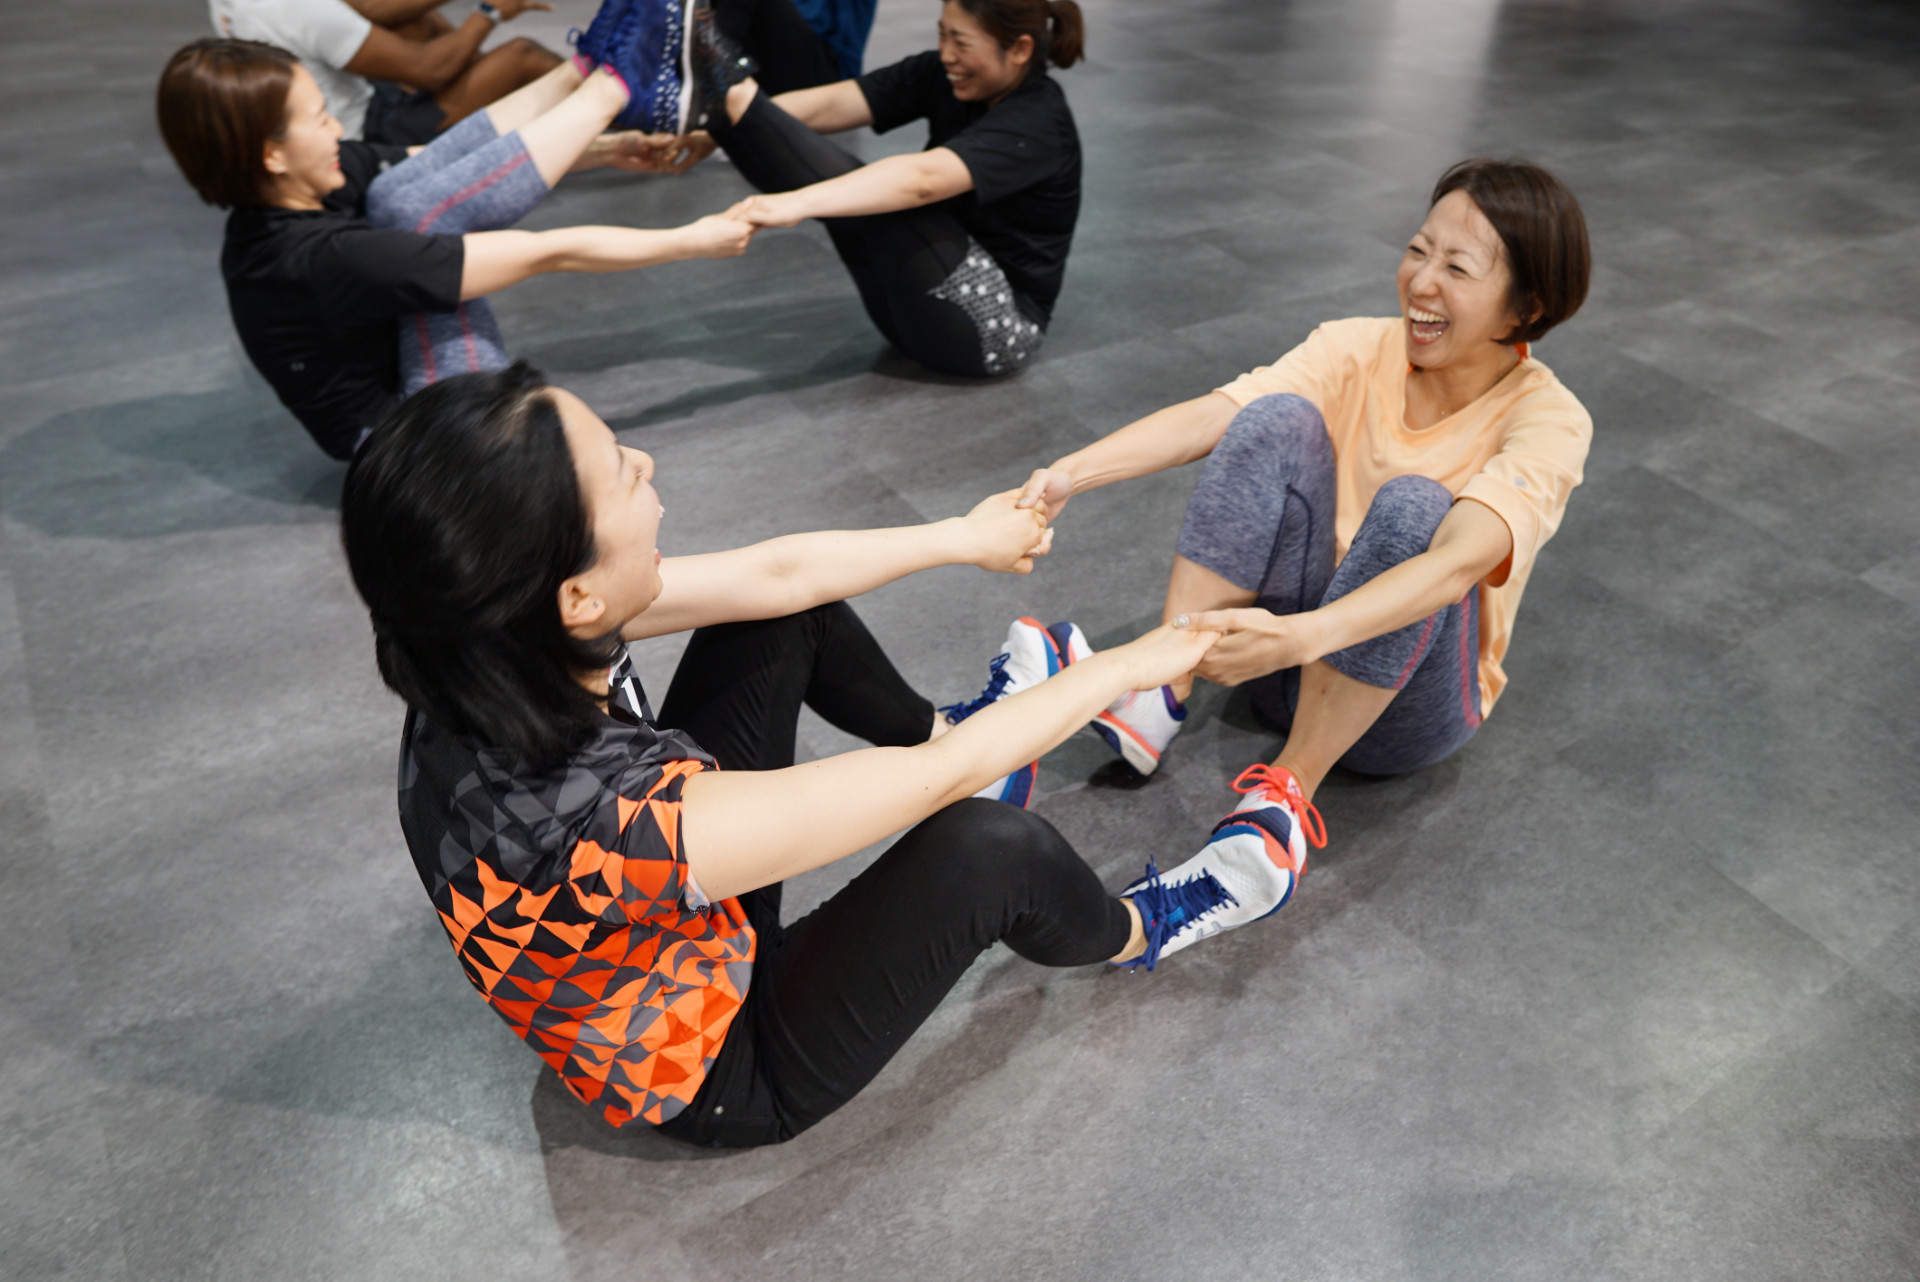 Cofit Asics Japan Office Connection Fitness Stretch 1